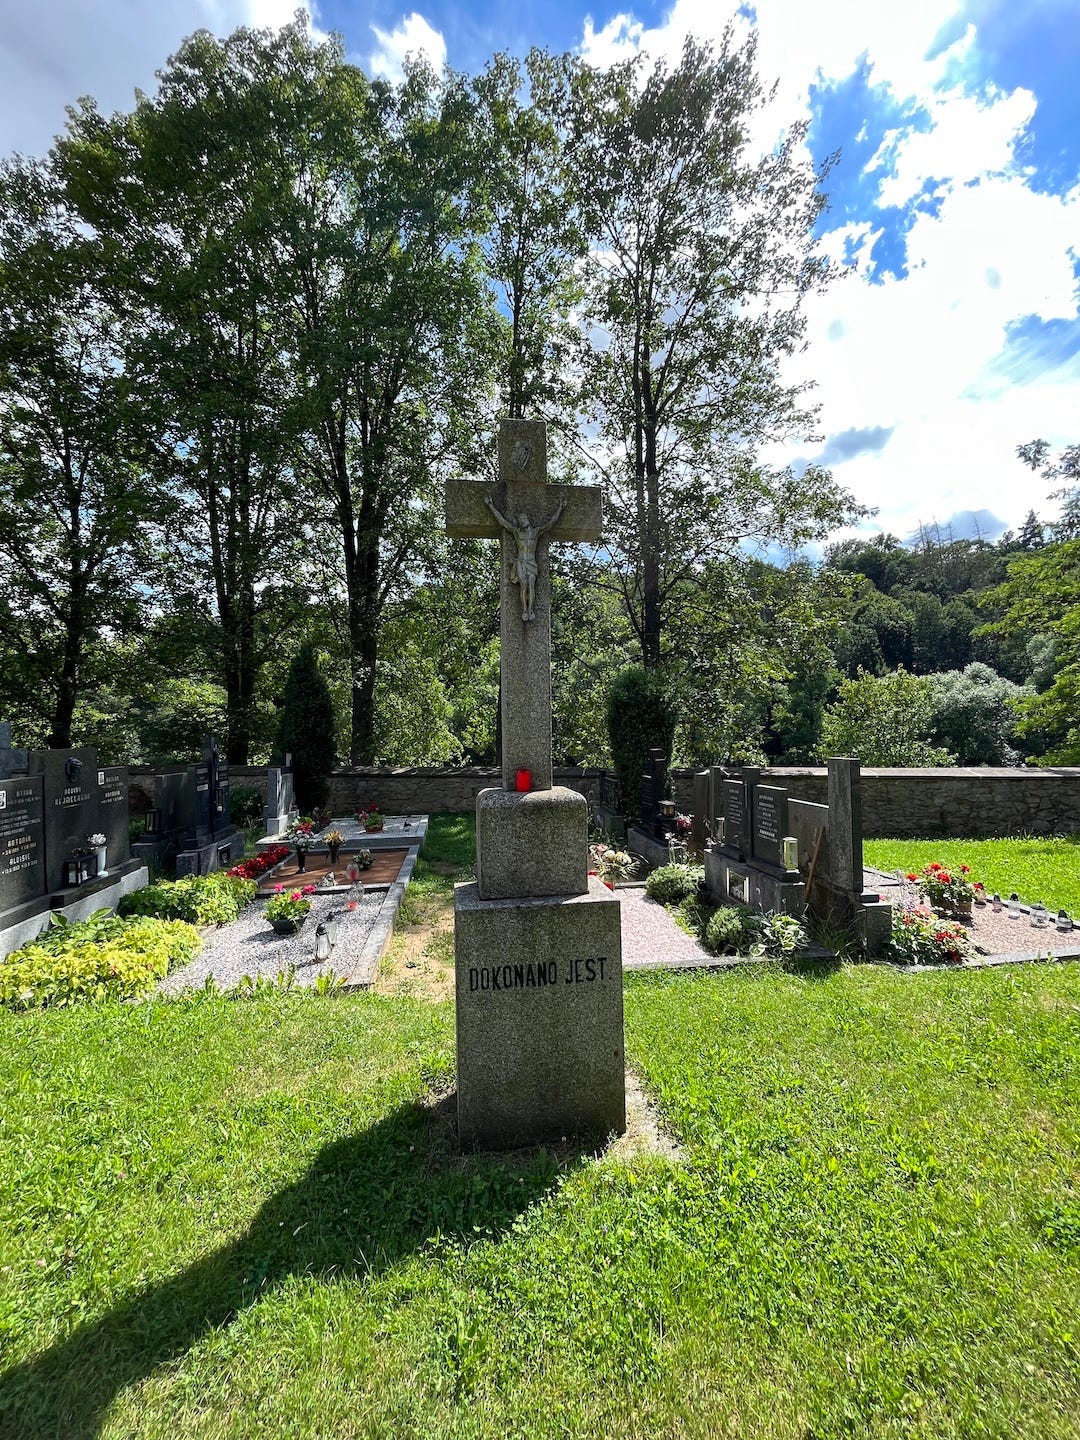 Cemetery with cement cross in the middle, tall trees around the fence, blue sky